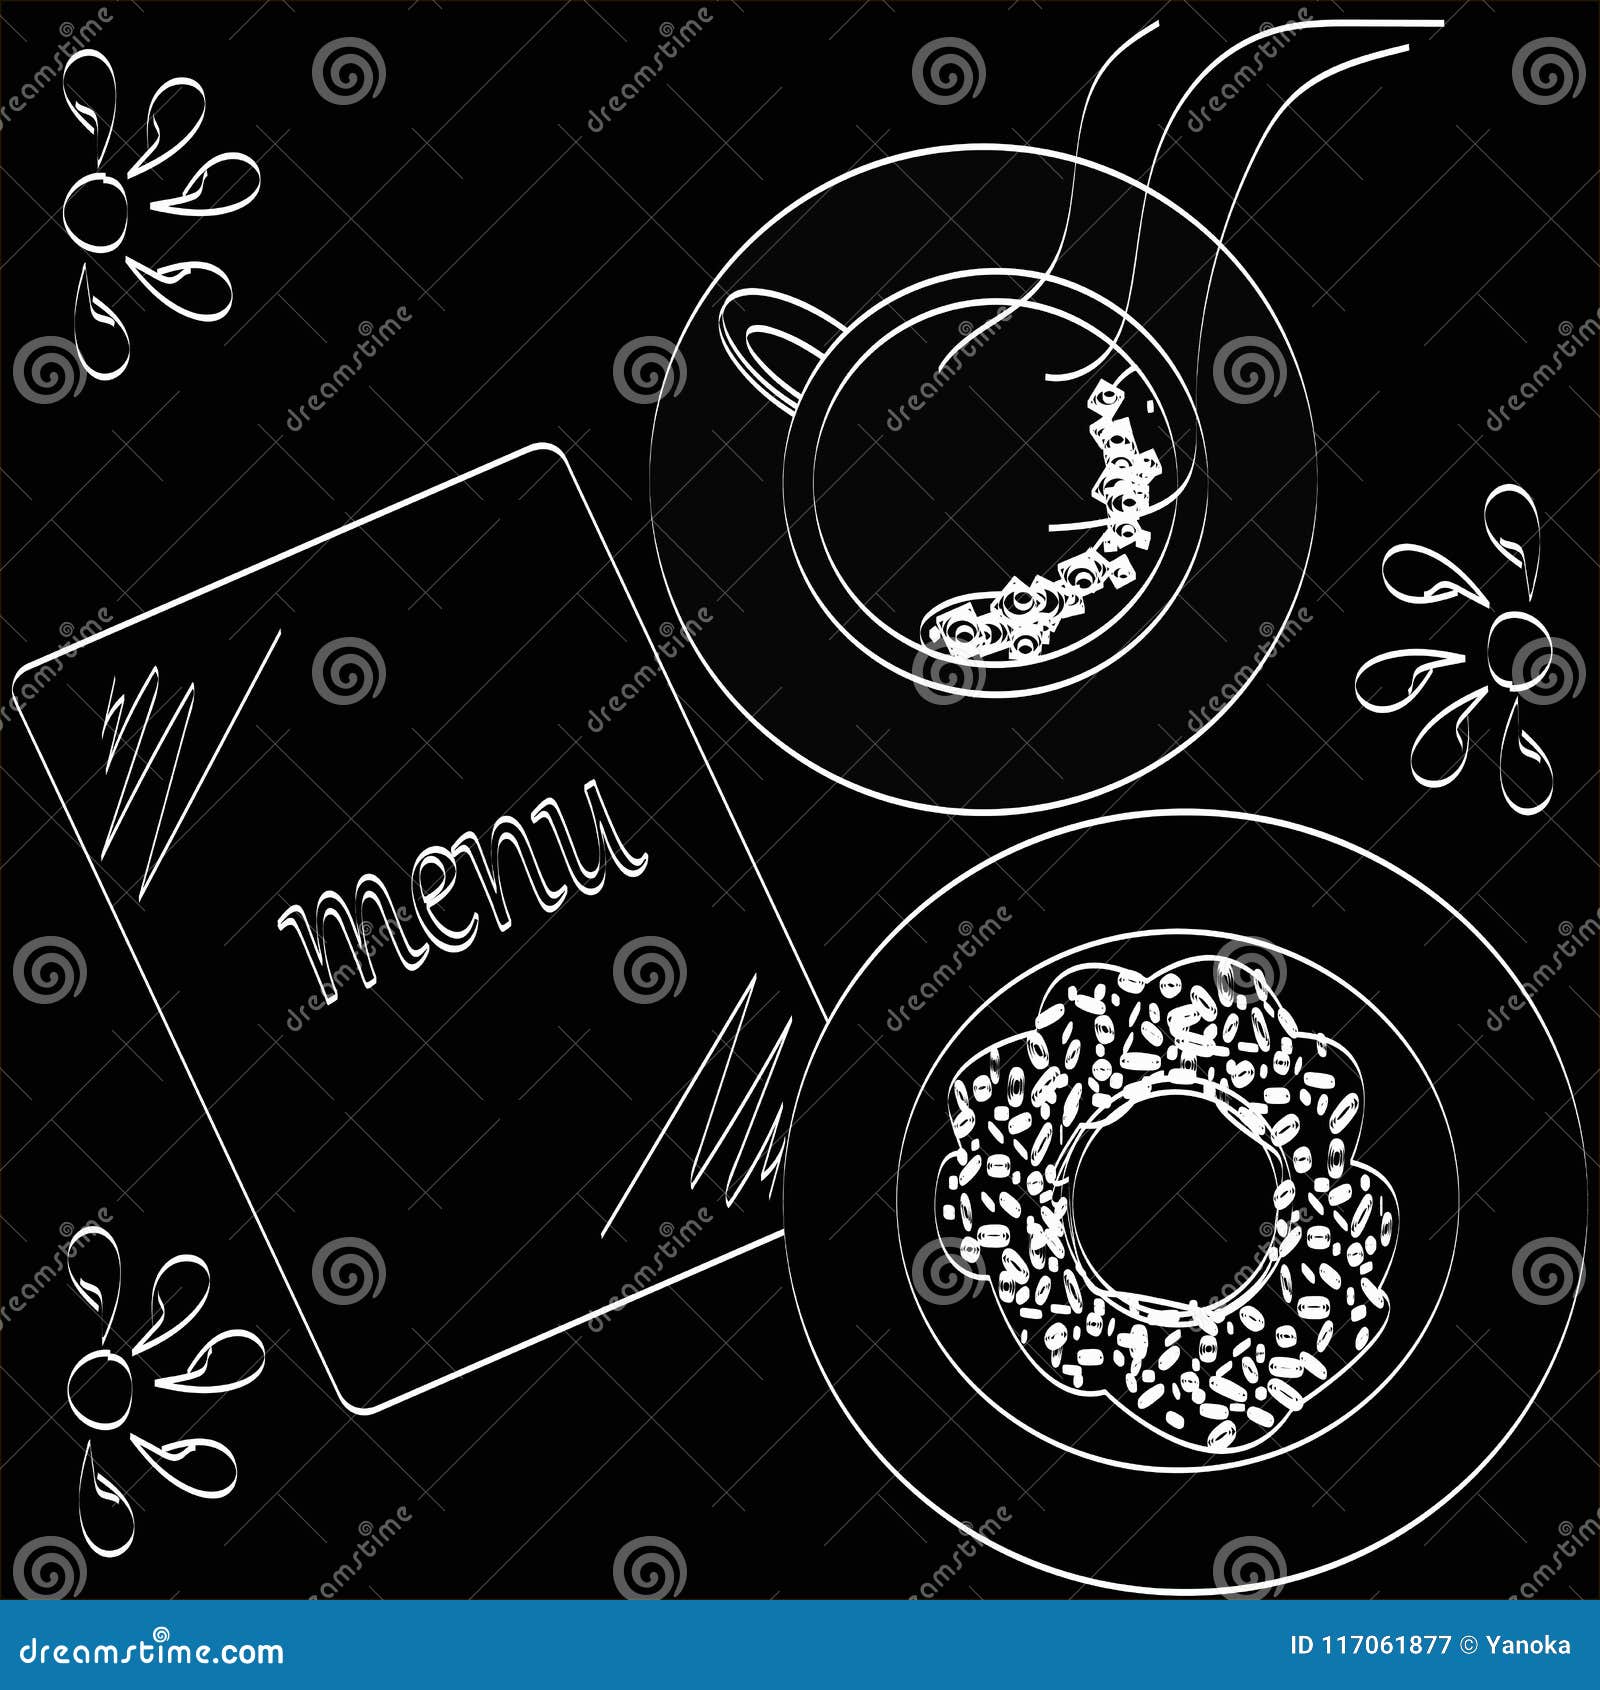 Coffee, Donut and Menu Drawn on a Black Background Stock Vector -  Illustration of closeup, black: 117061877